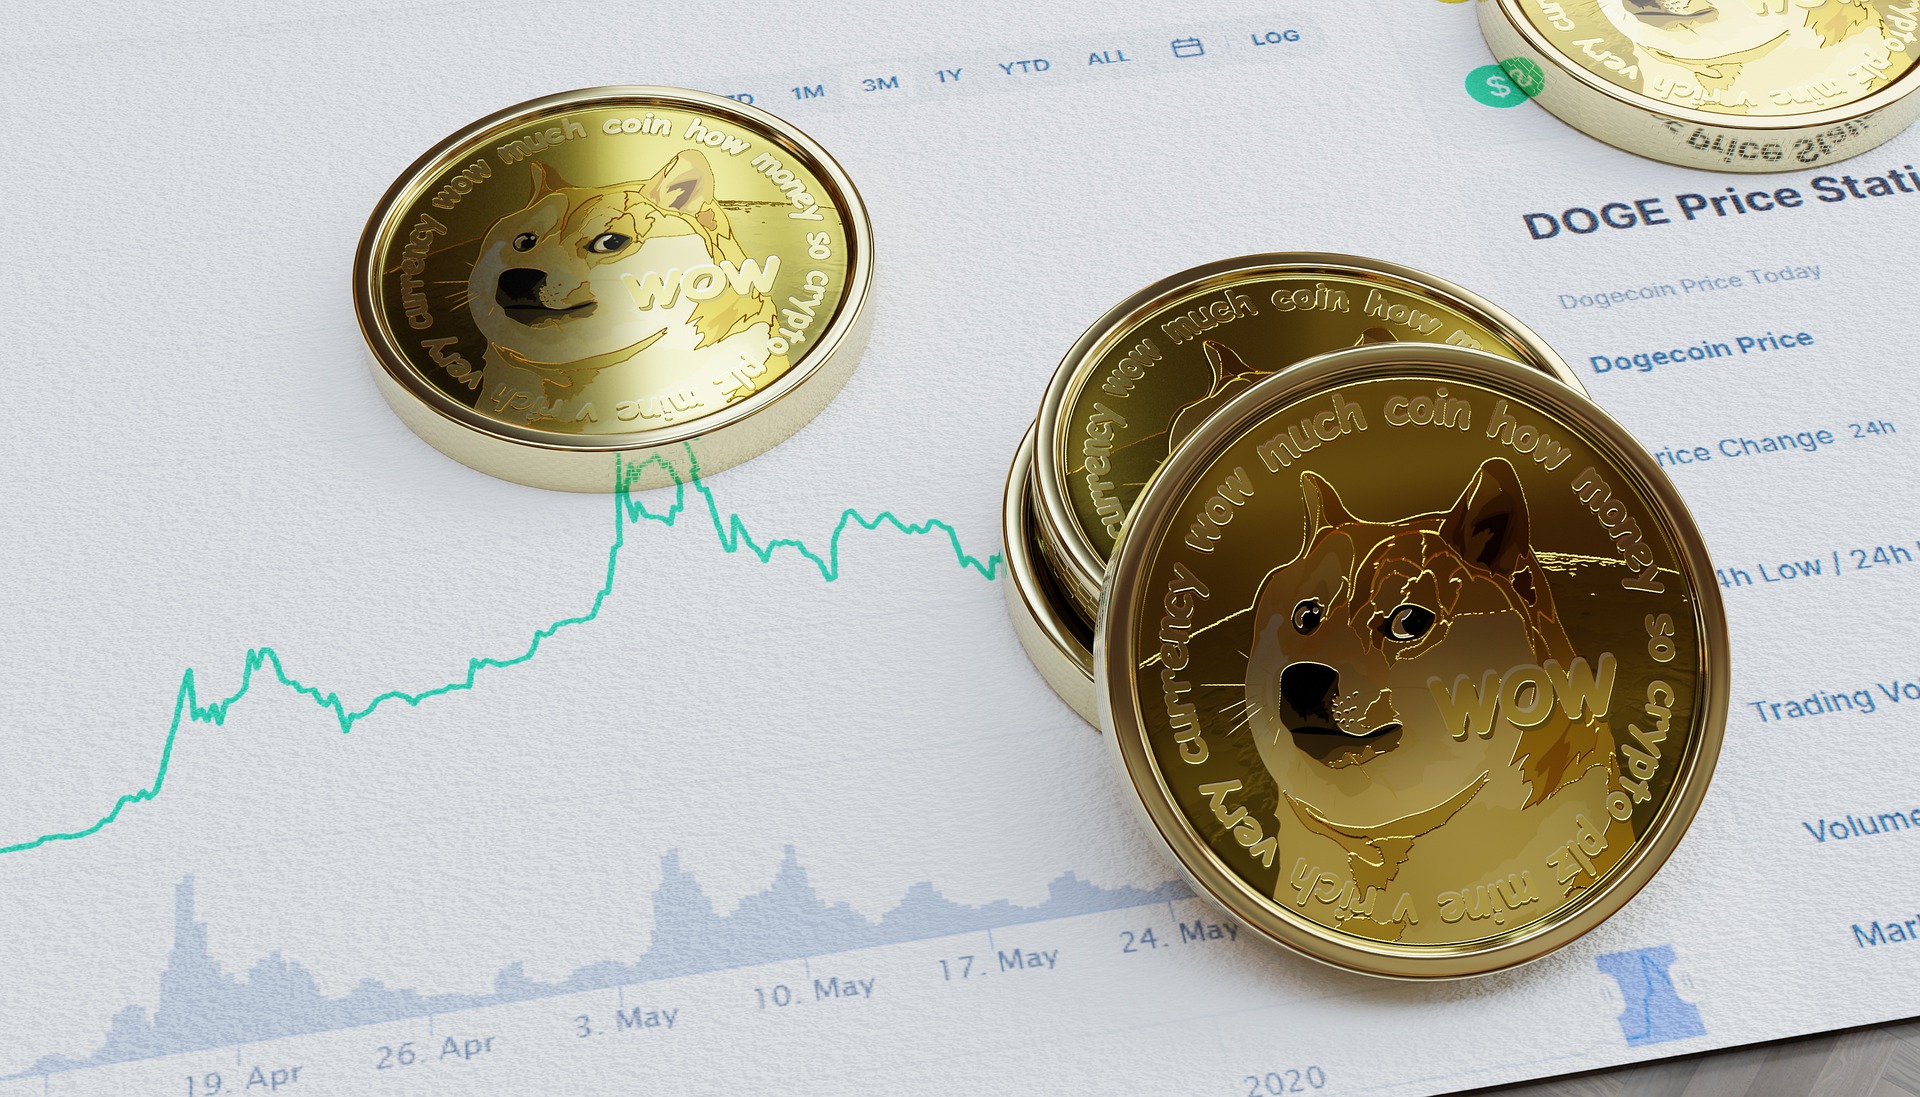 Dogecoin  latest dogecoin news With returns of up to 1,000,000%, shitcoins have attracted investors, but experts do not recommend investment thumbnail